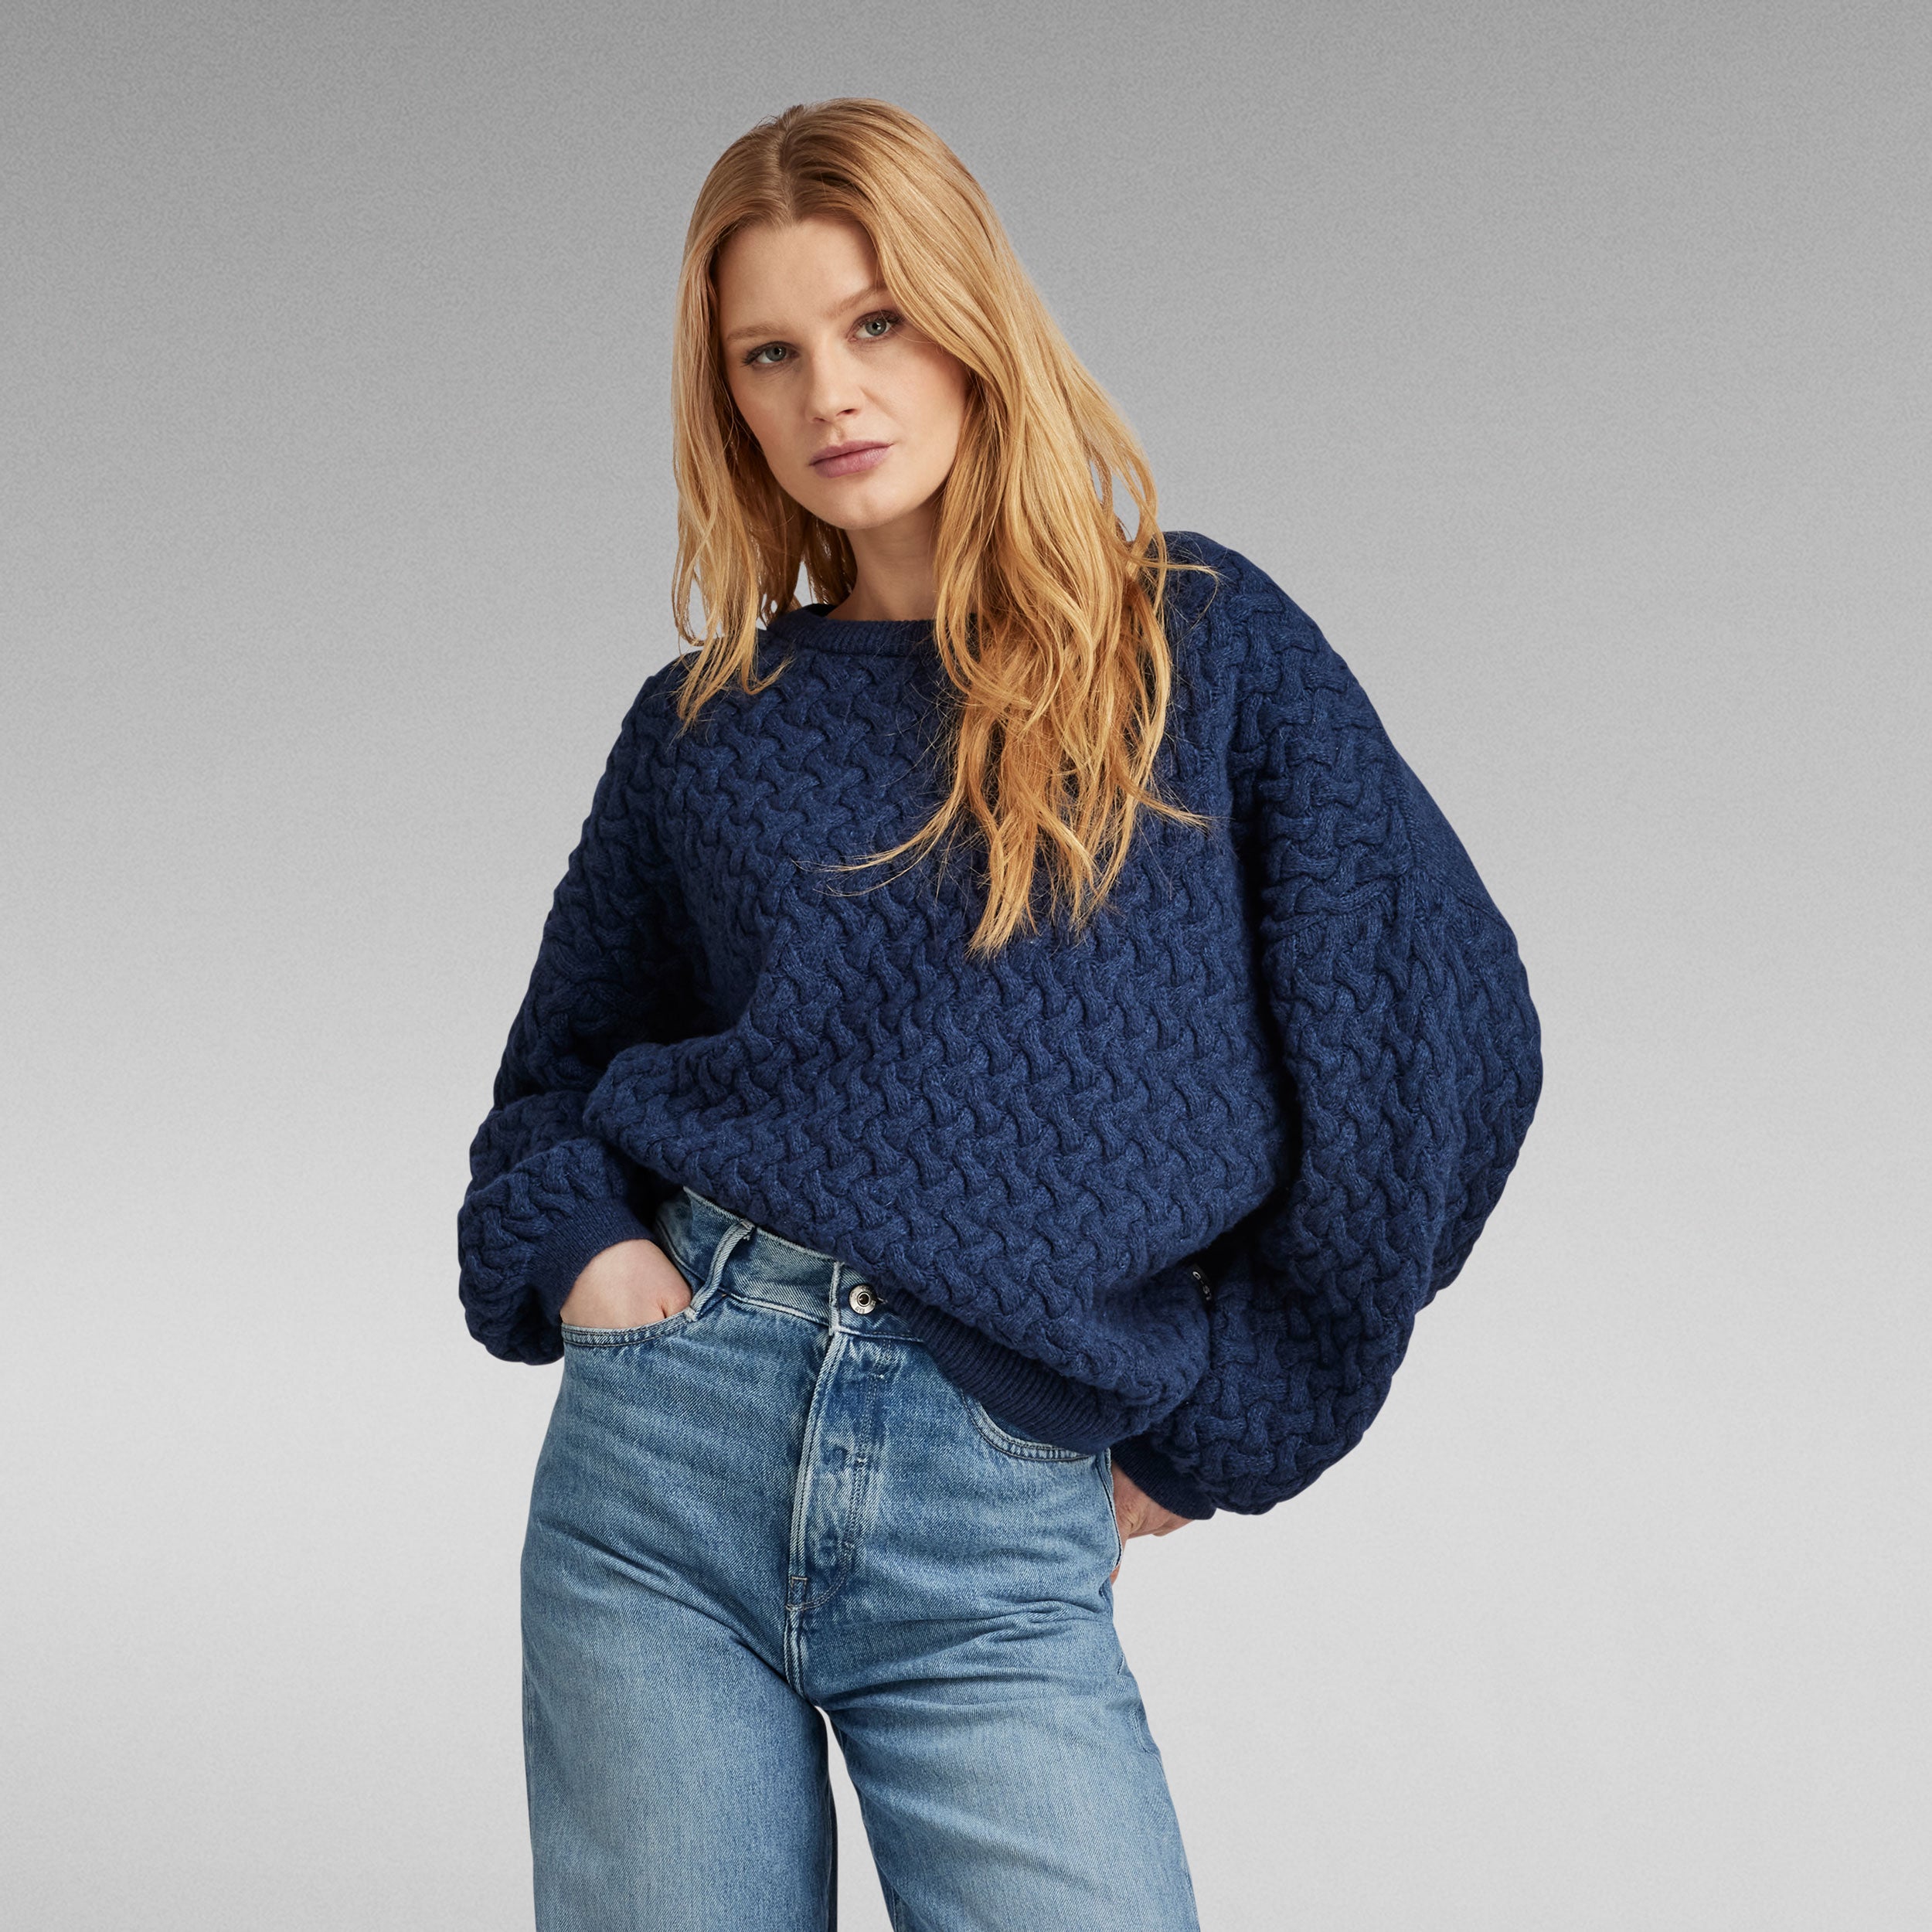 G-Star Raw - Chunky Loose Boat Knitted Sweater - Rank Blue